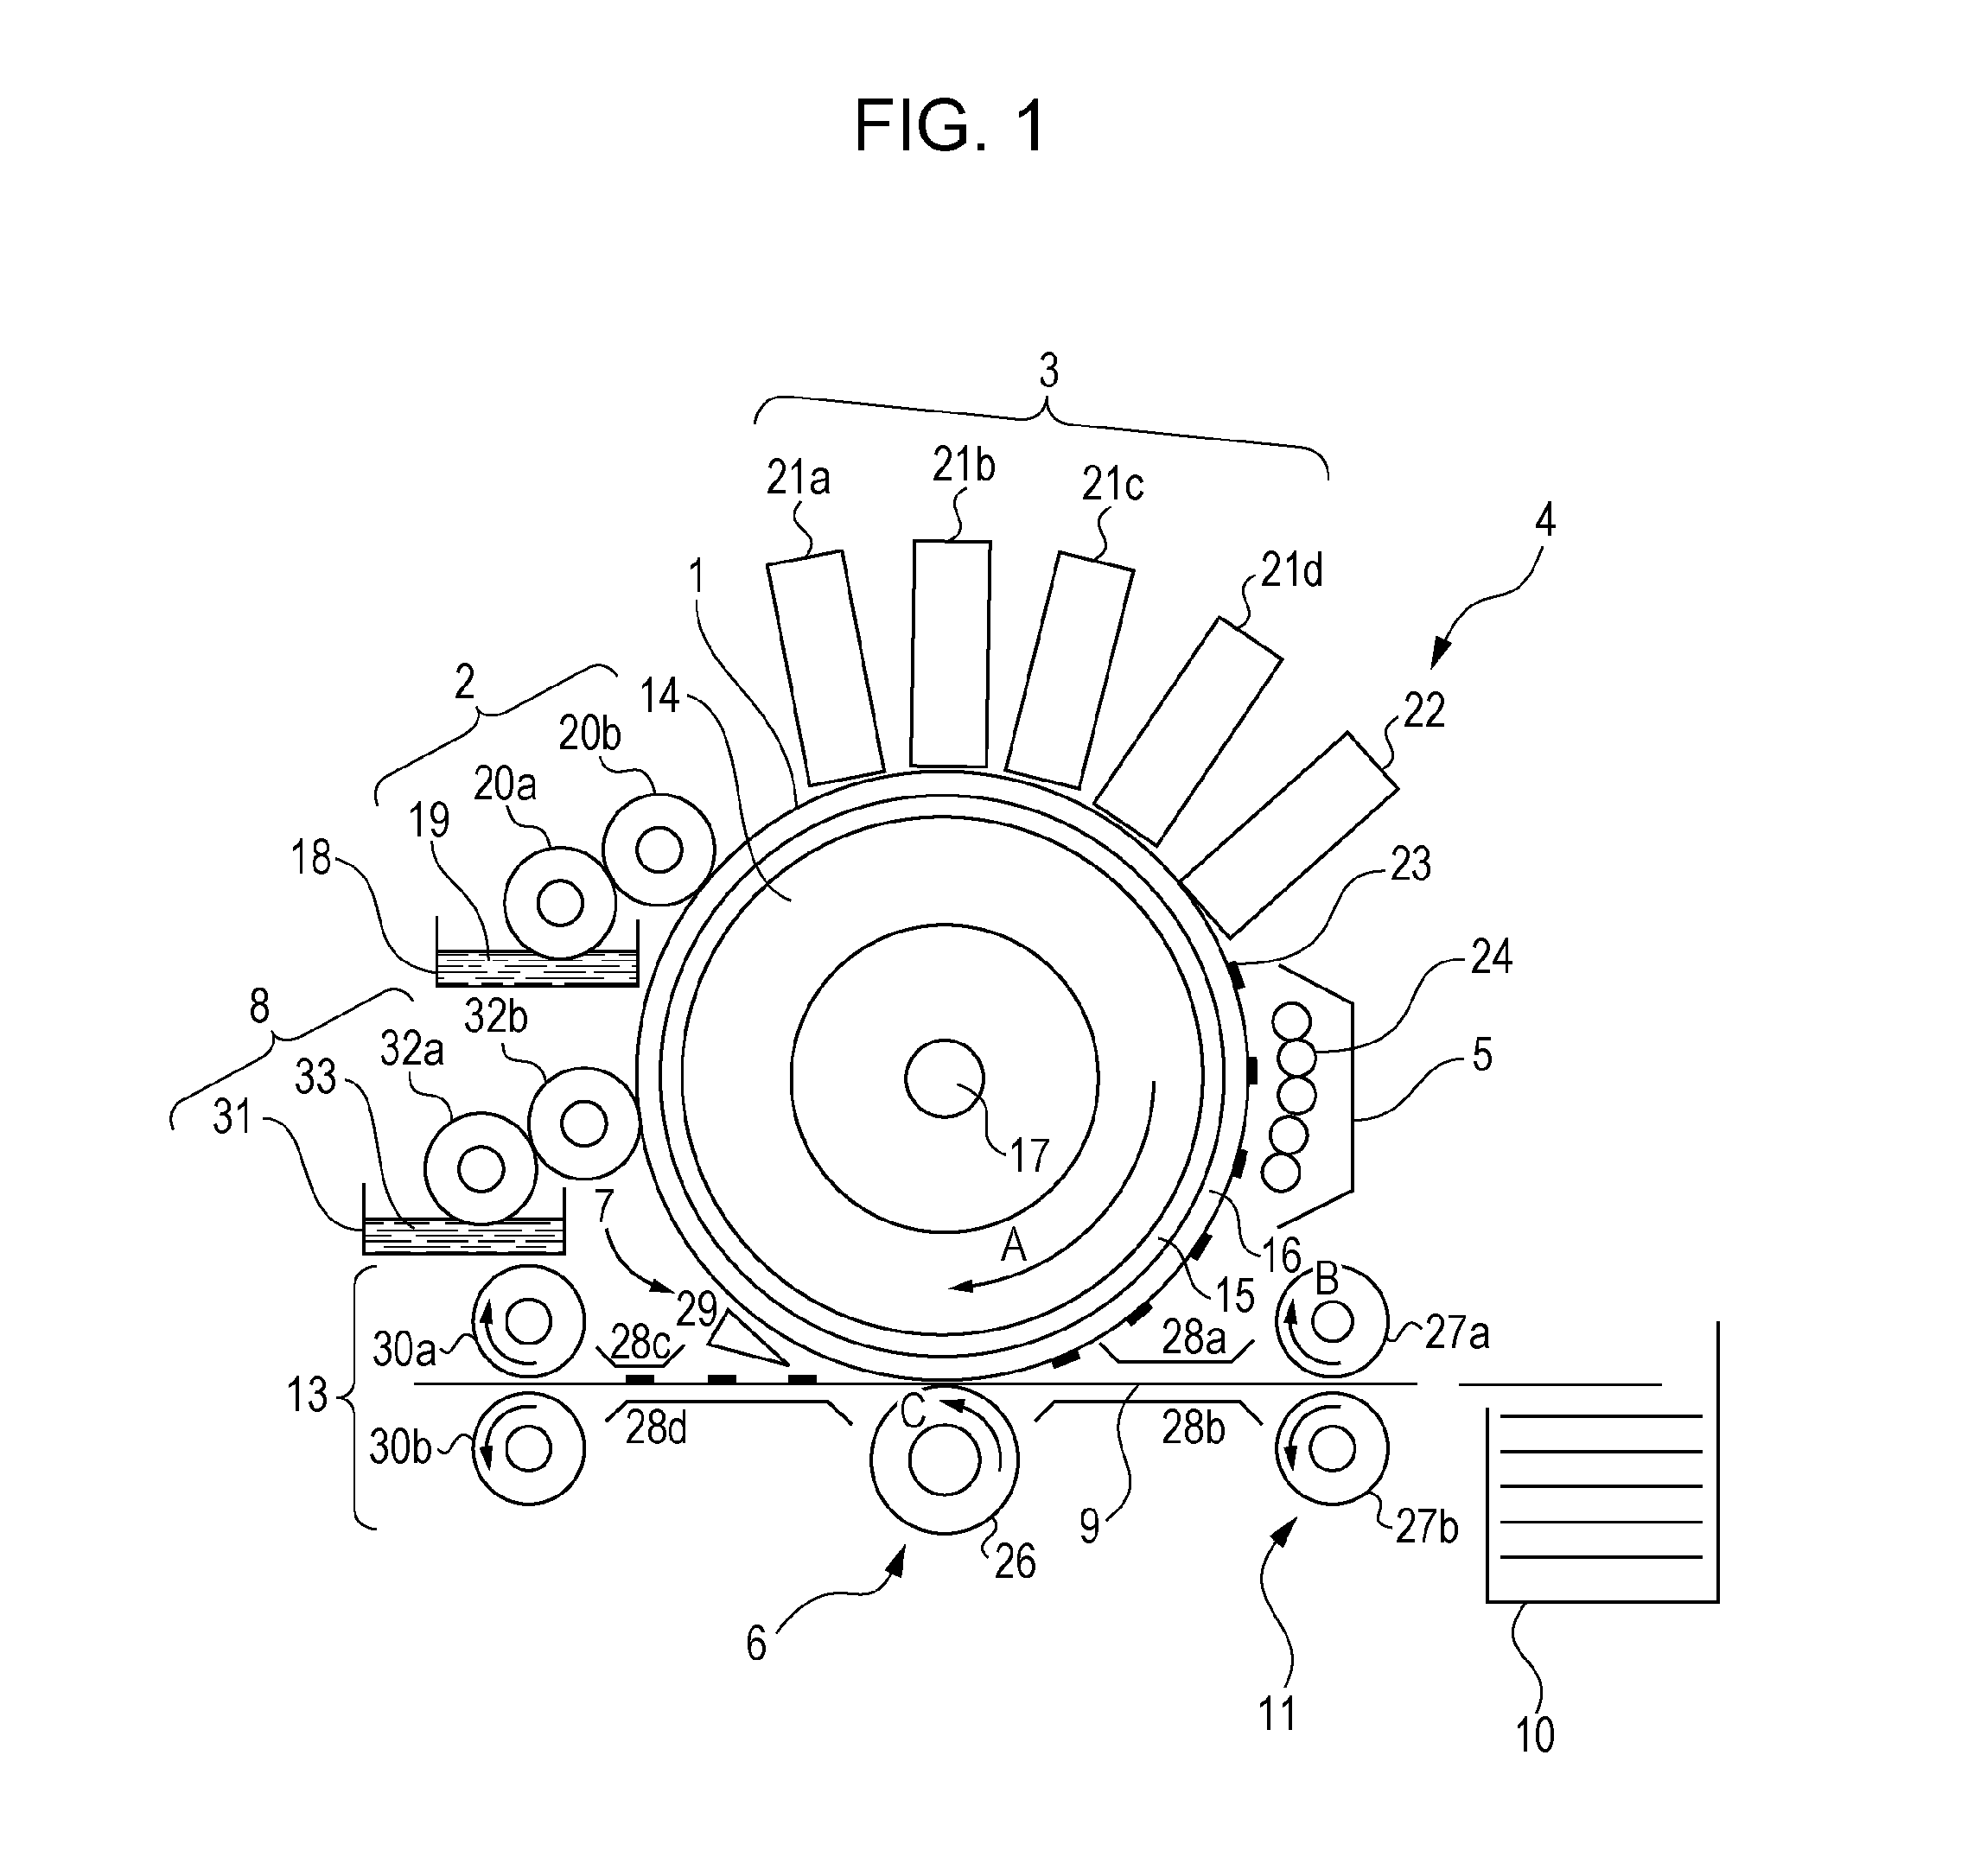 Image forming method and image forming apparatus for forming an image on an intermediate transfer medium